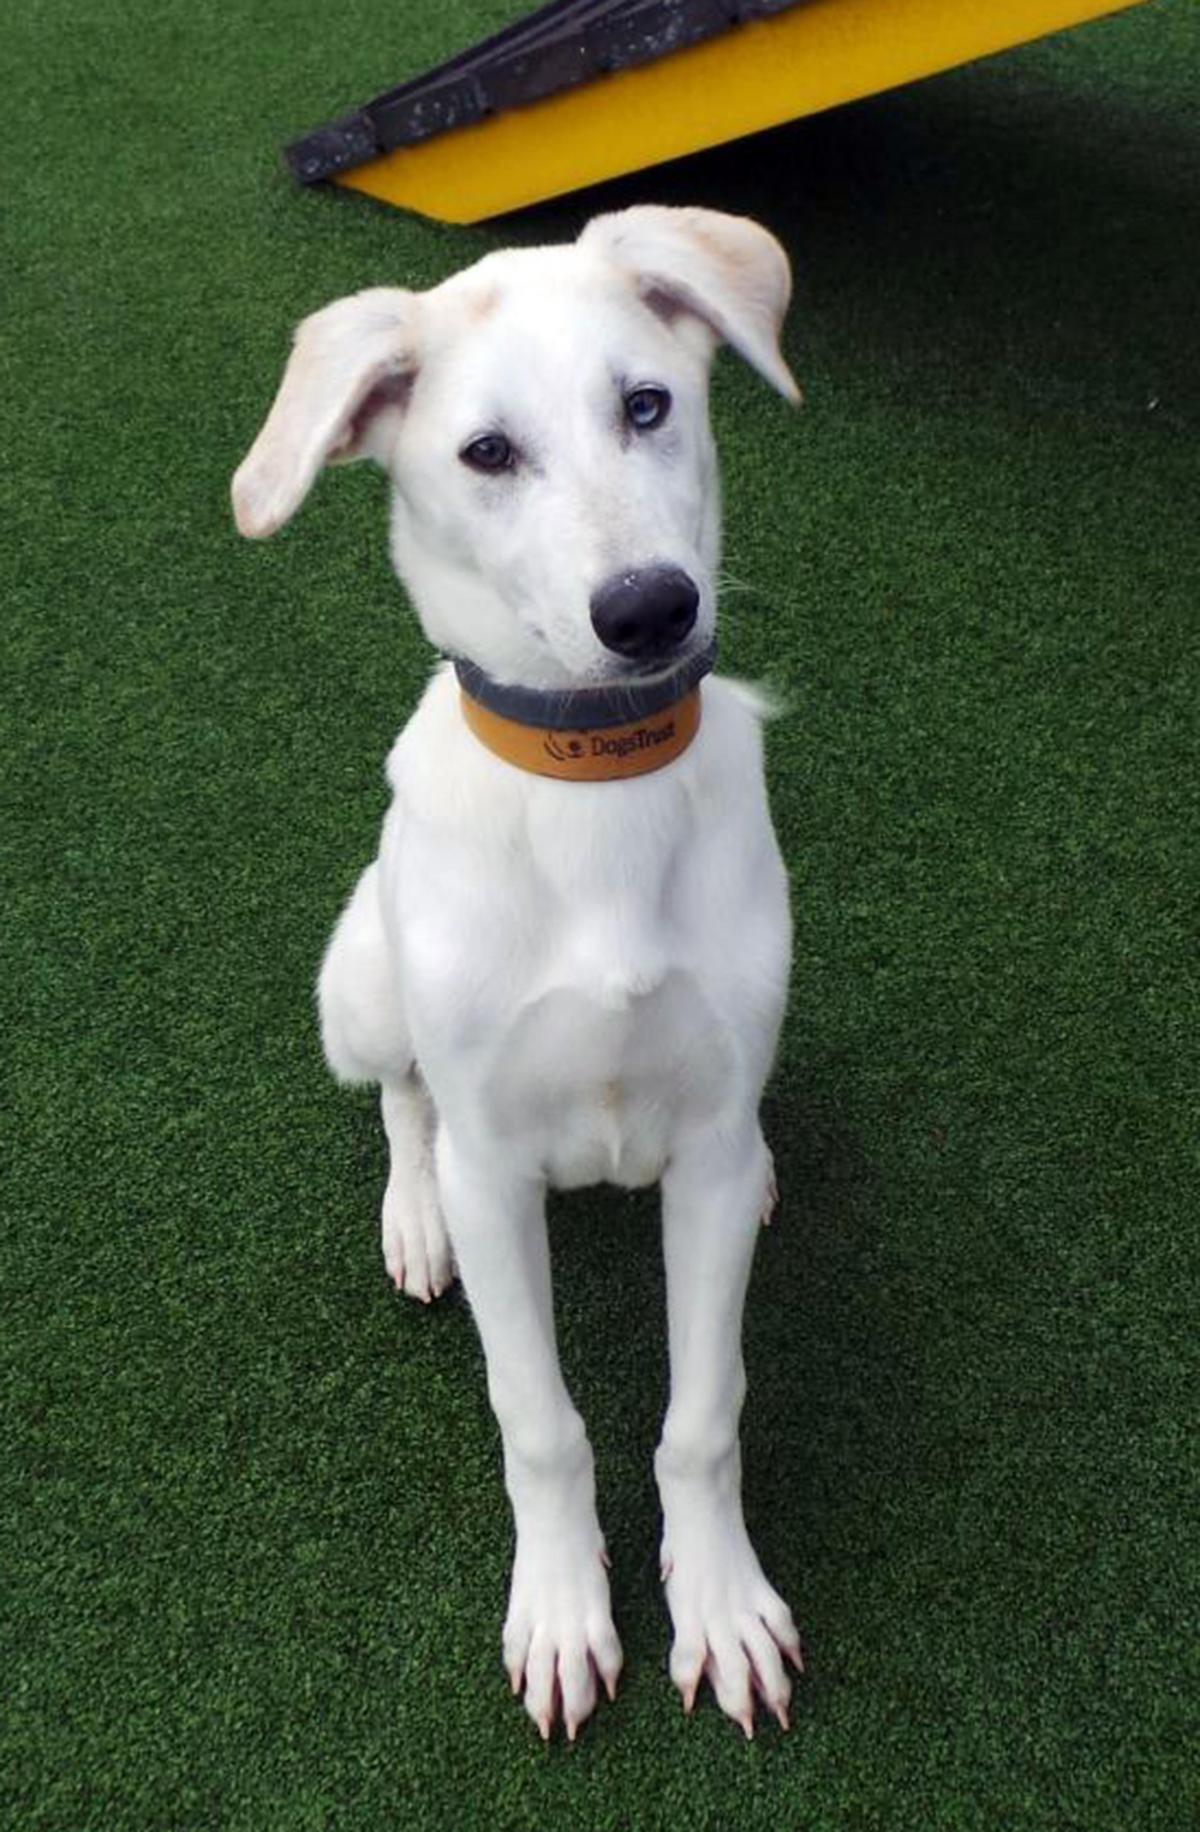 22/04 Milo – 10 month old male Lurcher cross
Needs a home where he will be given the time and space he needs to settle in. He is a clever cookie who will be the only pet